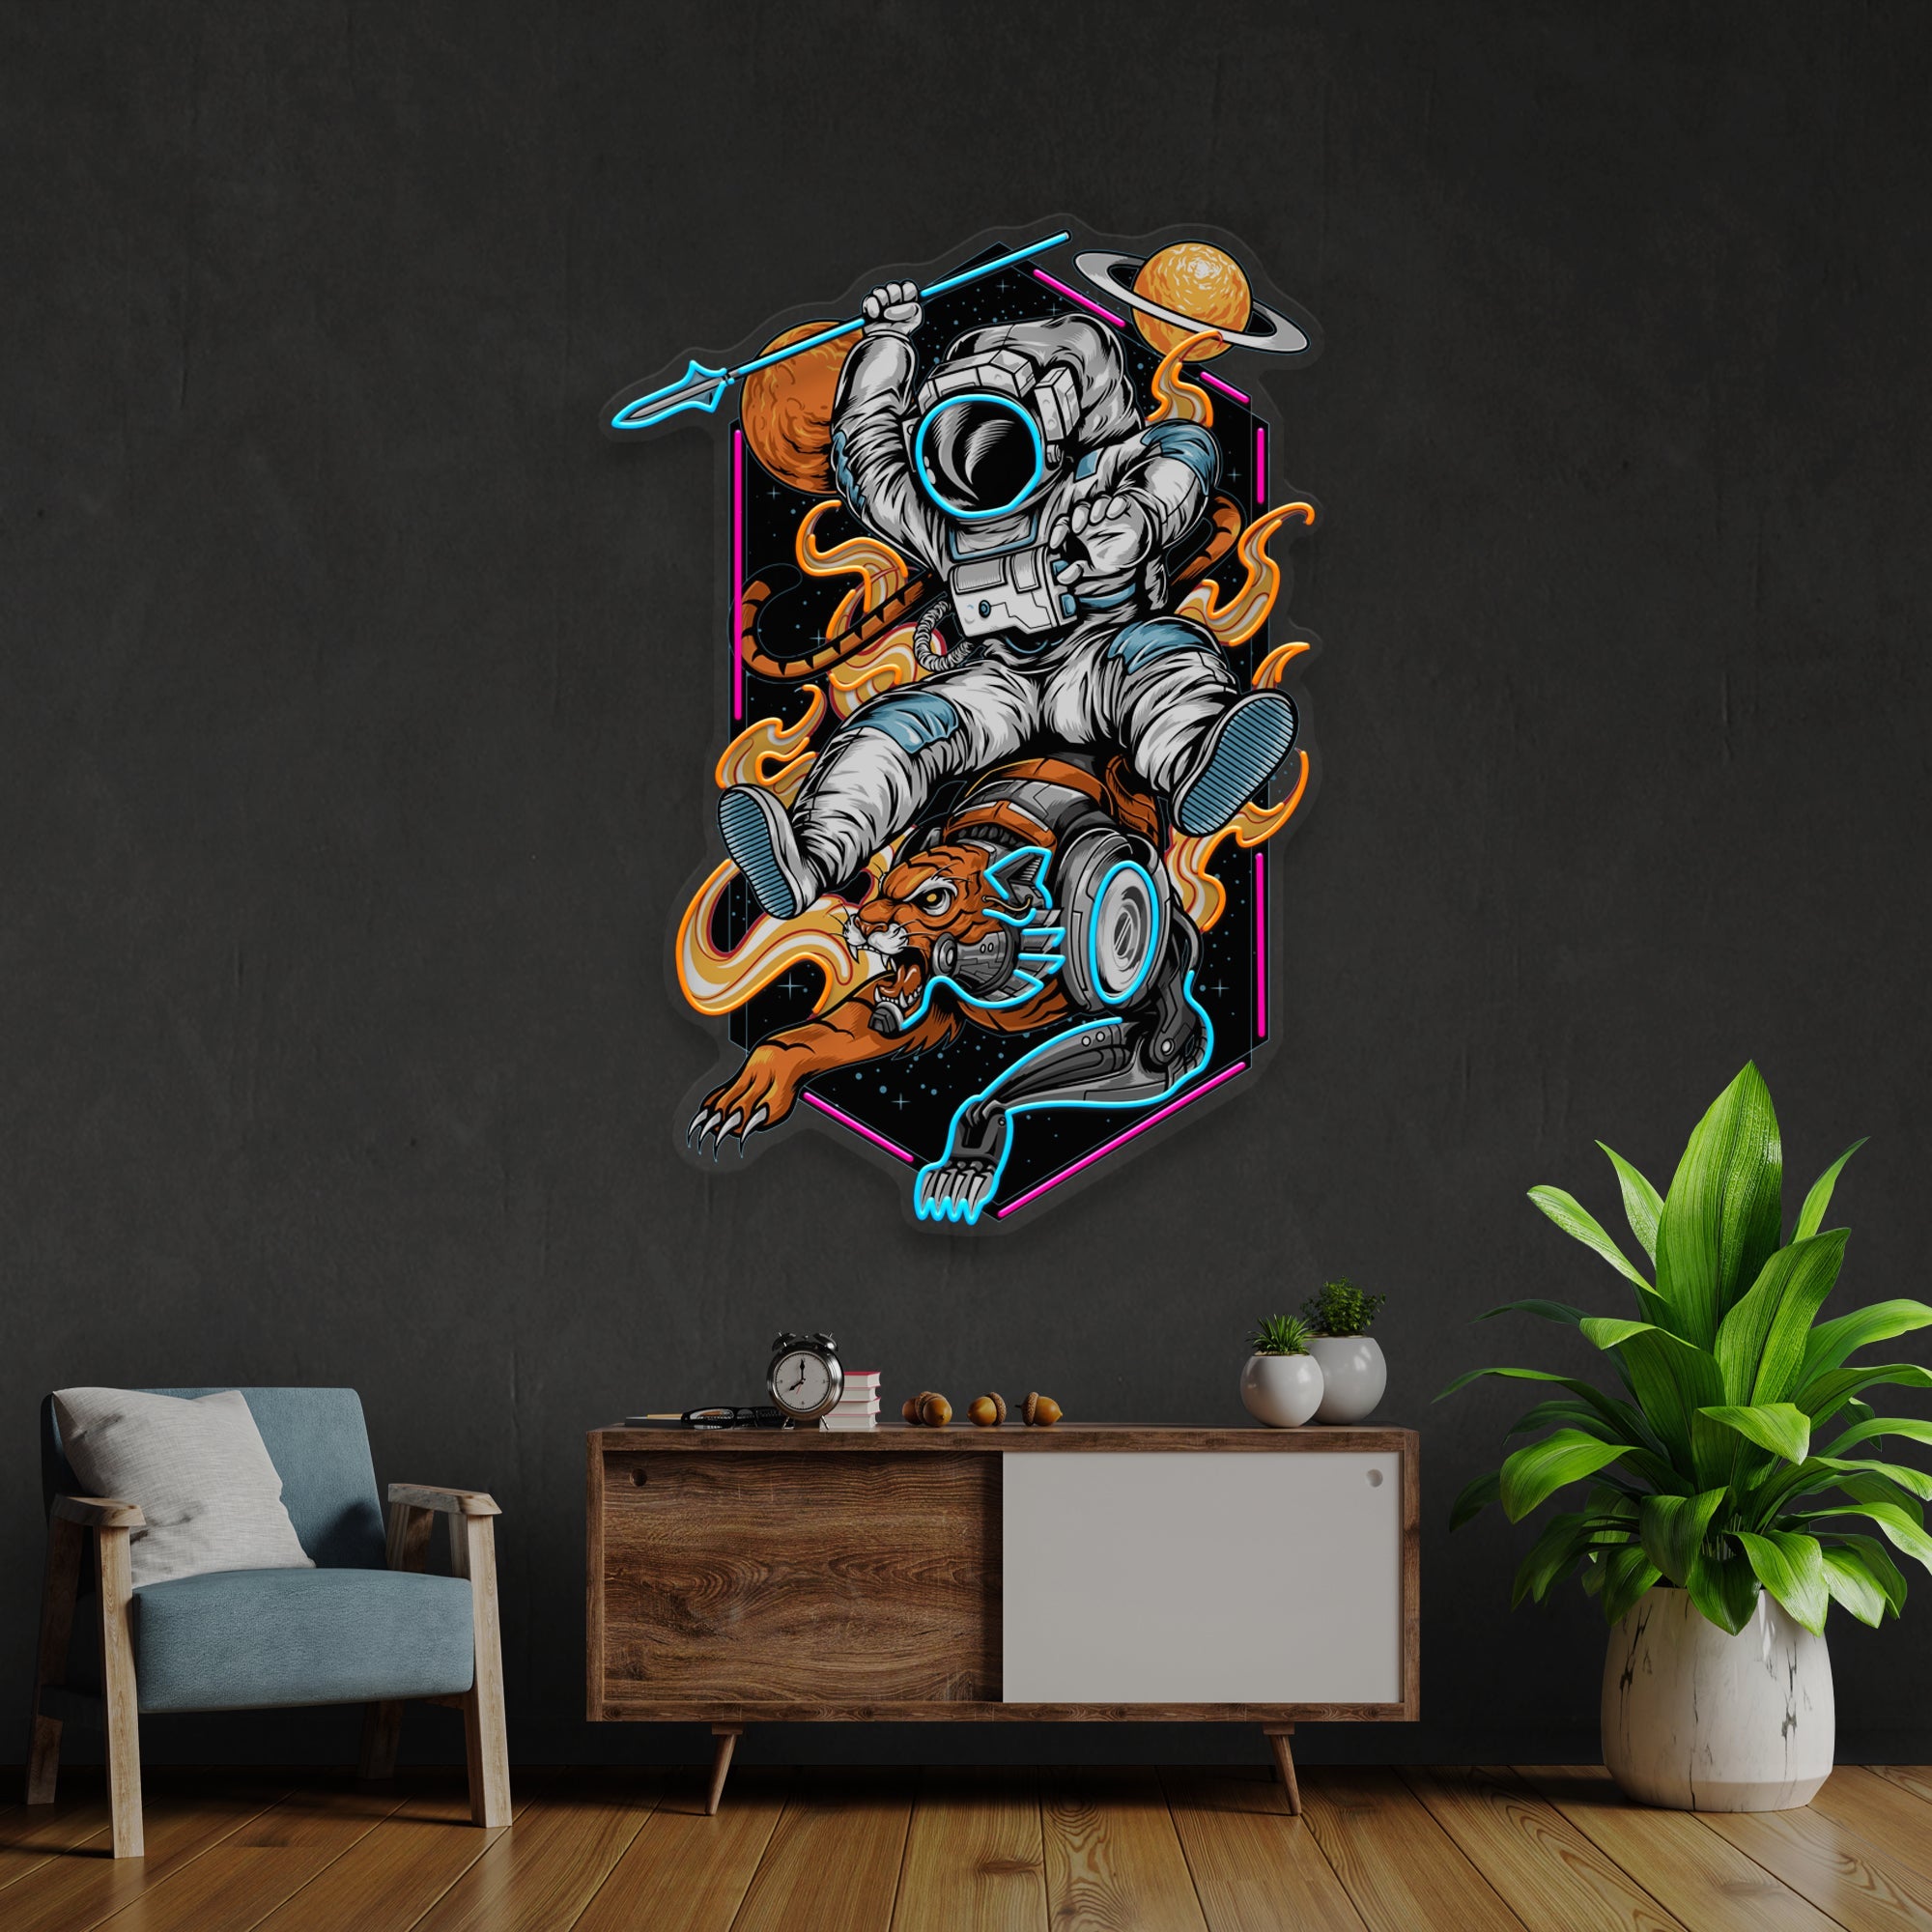 Astronaut Riding Outer Space Tiger Artwork Led Neon Sign Light - Neonbir